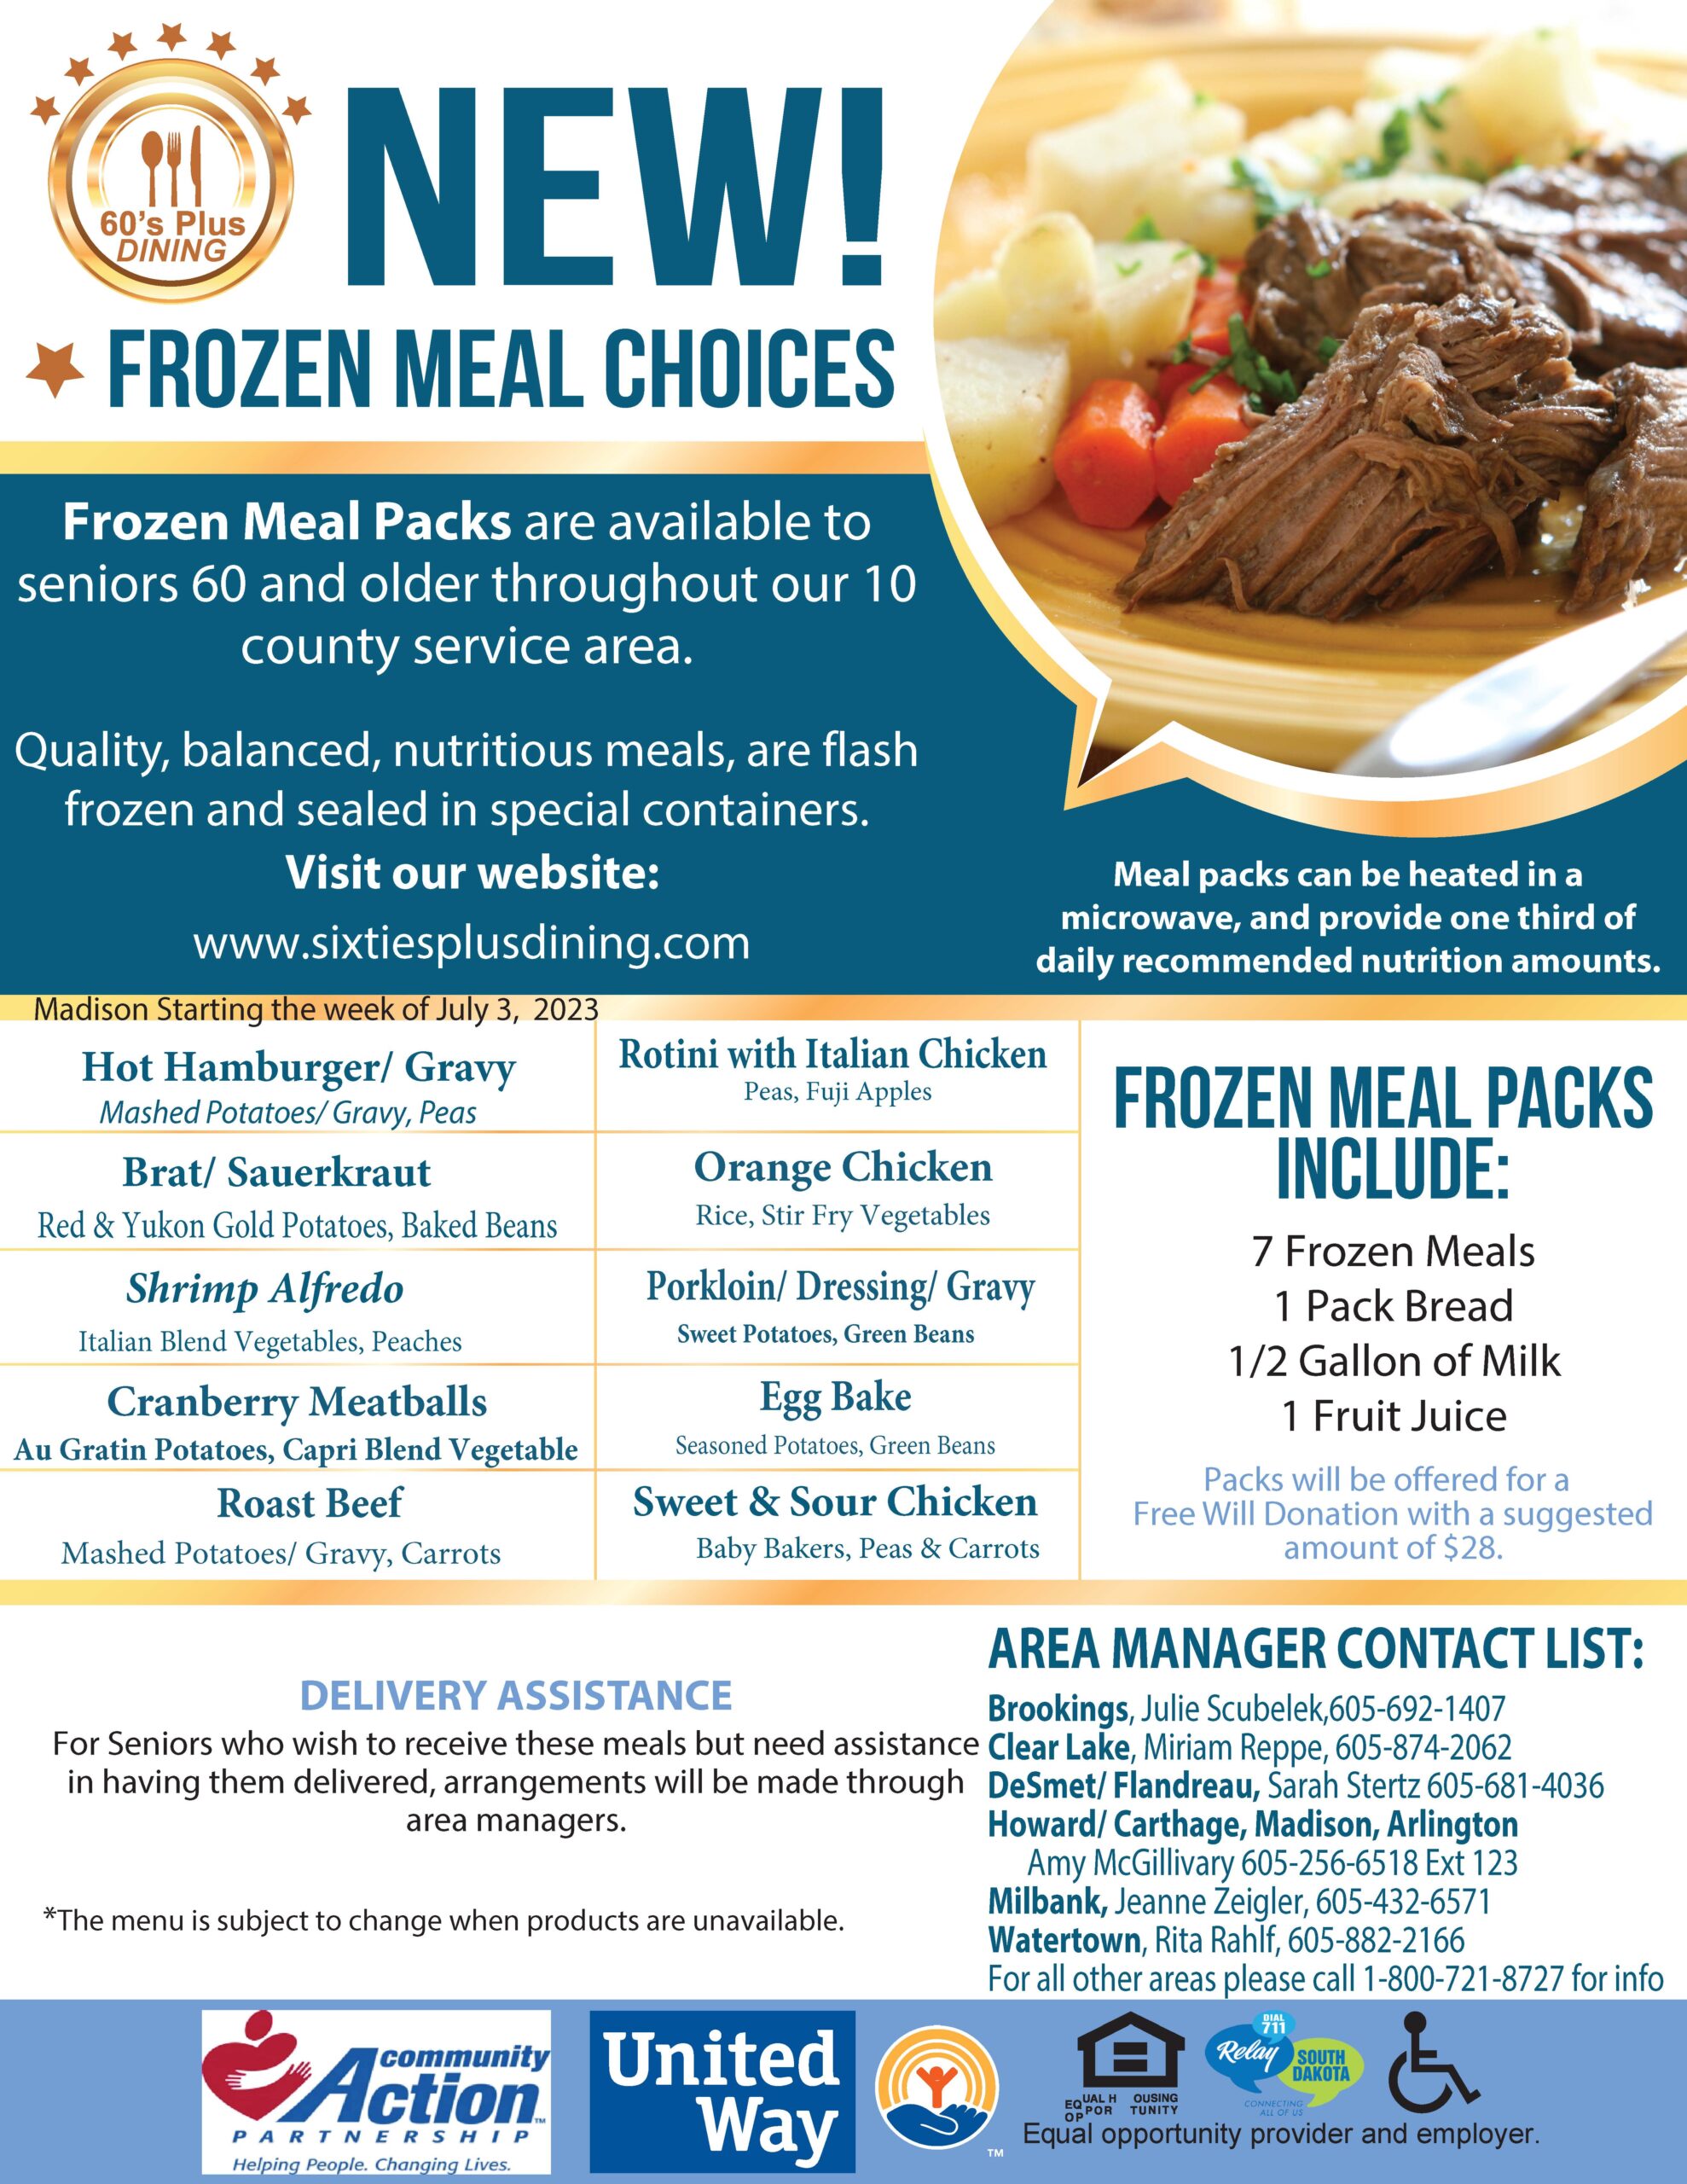 Madison Frozen Meal Choices -July 2023 Main